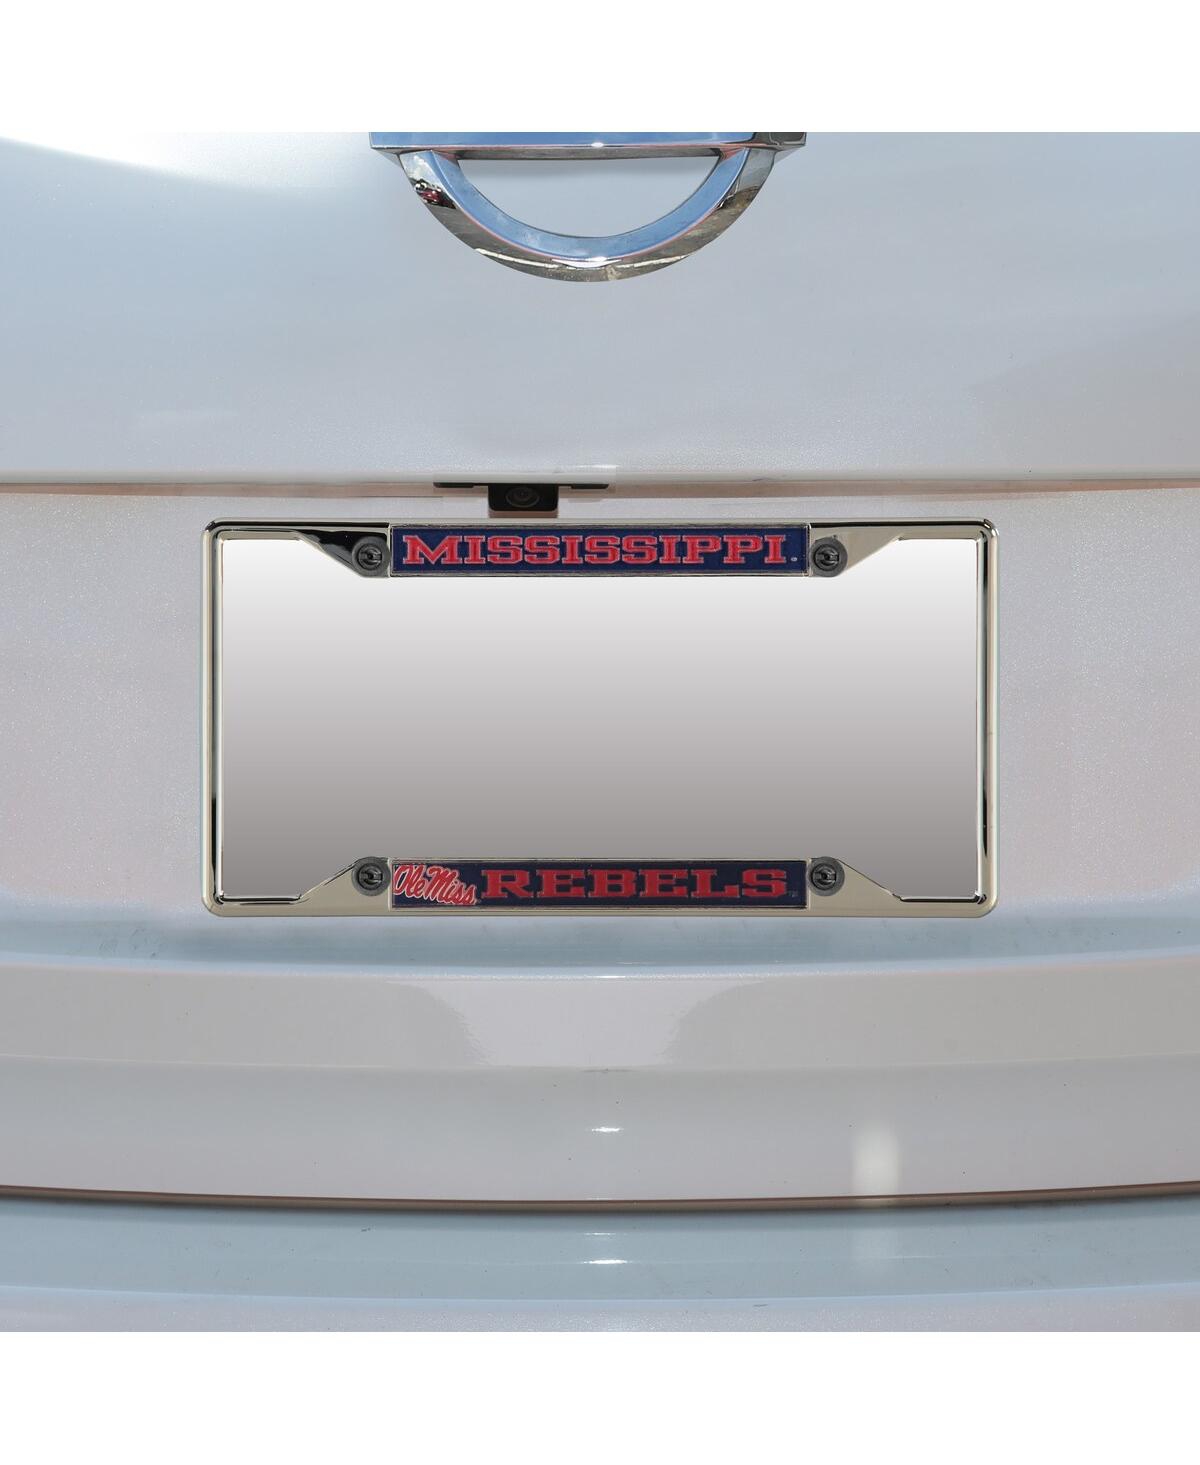 Stockdale Ole Miss Rebels Small Over Small Mega License Plate Frame In Gray